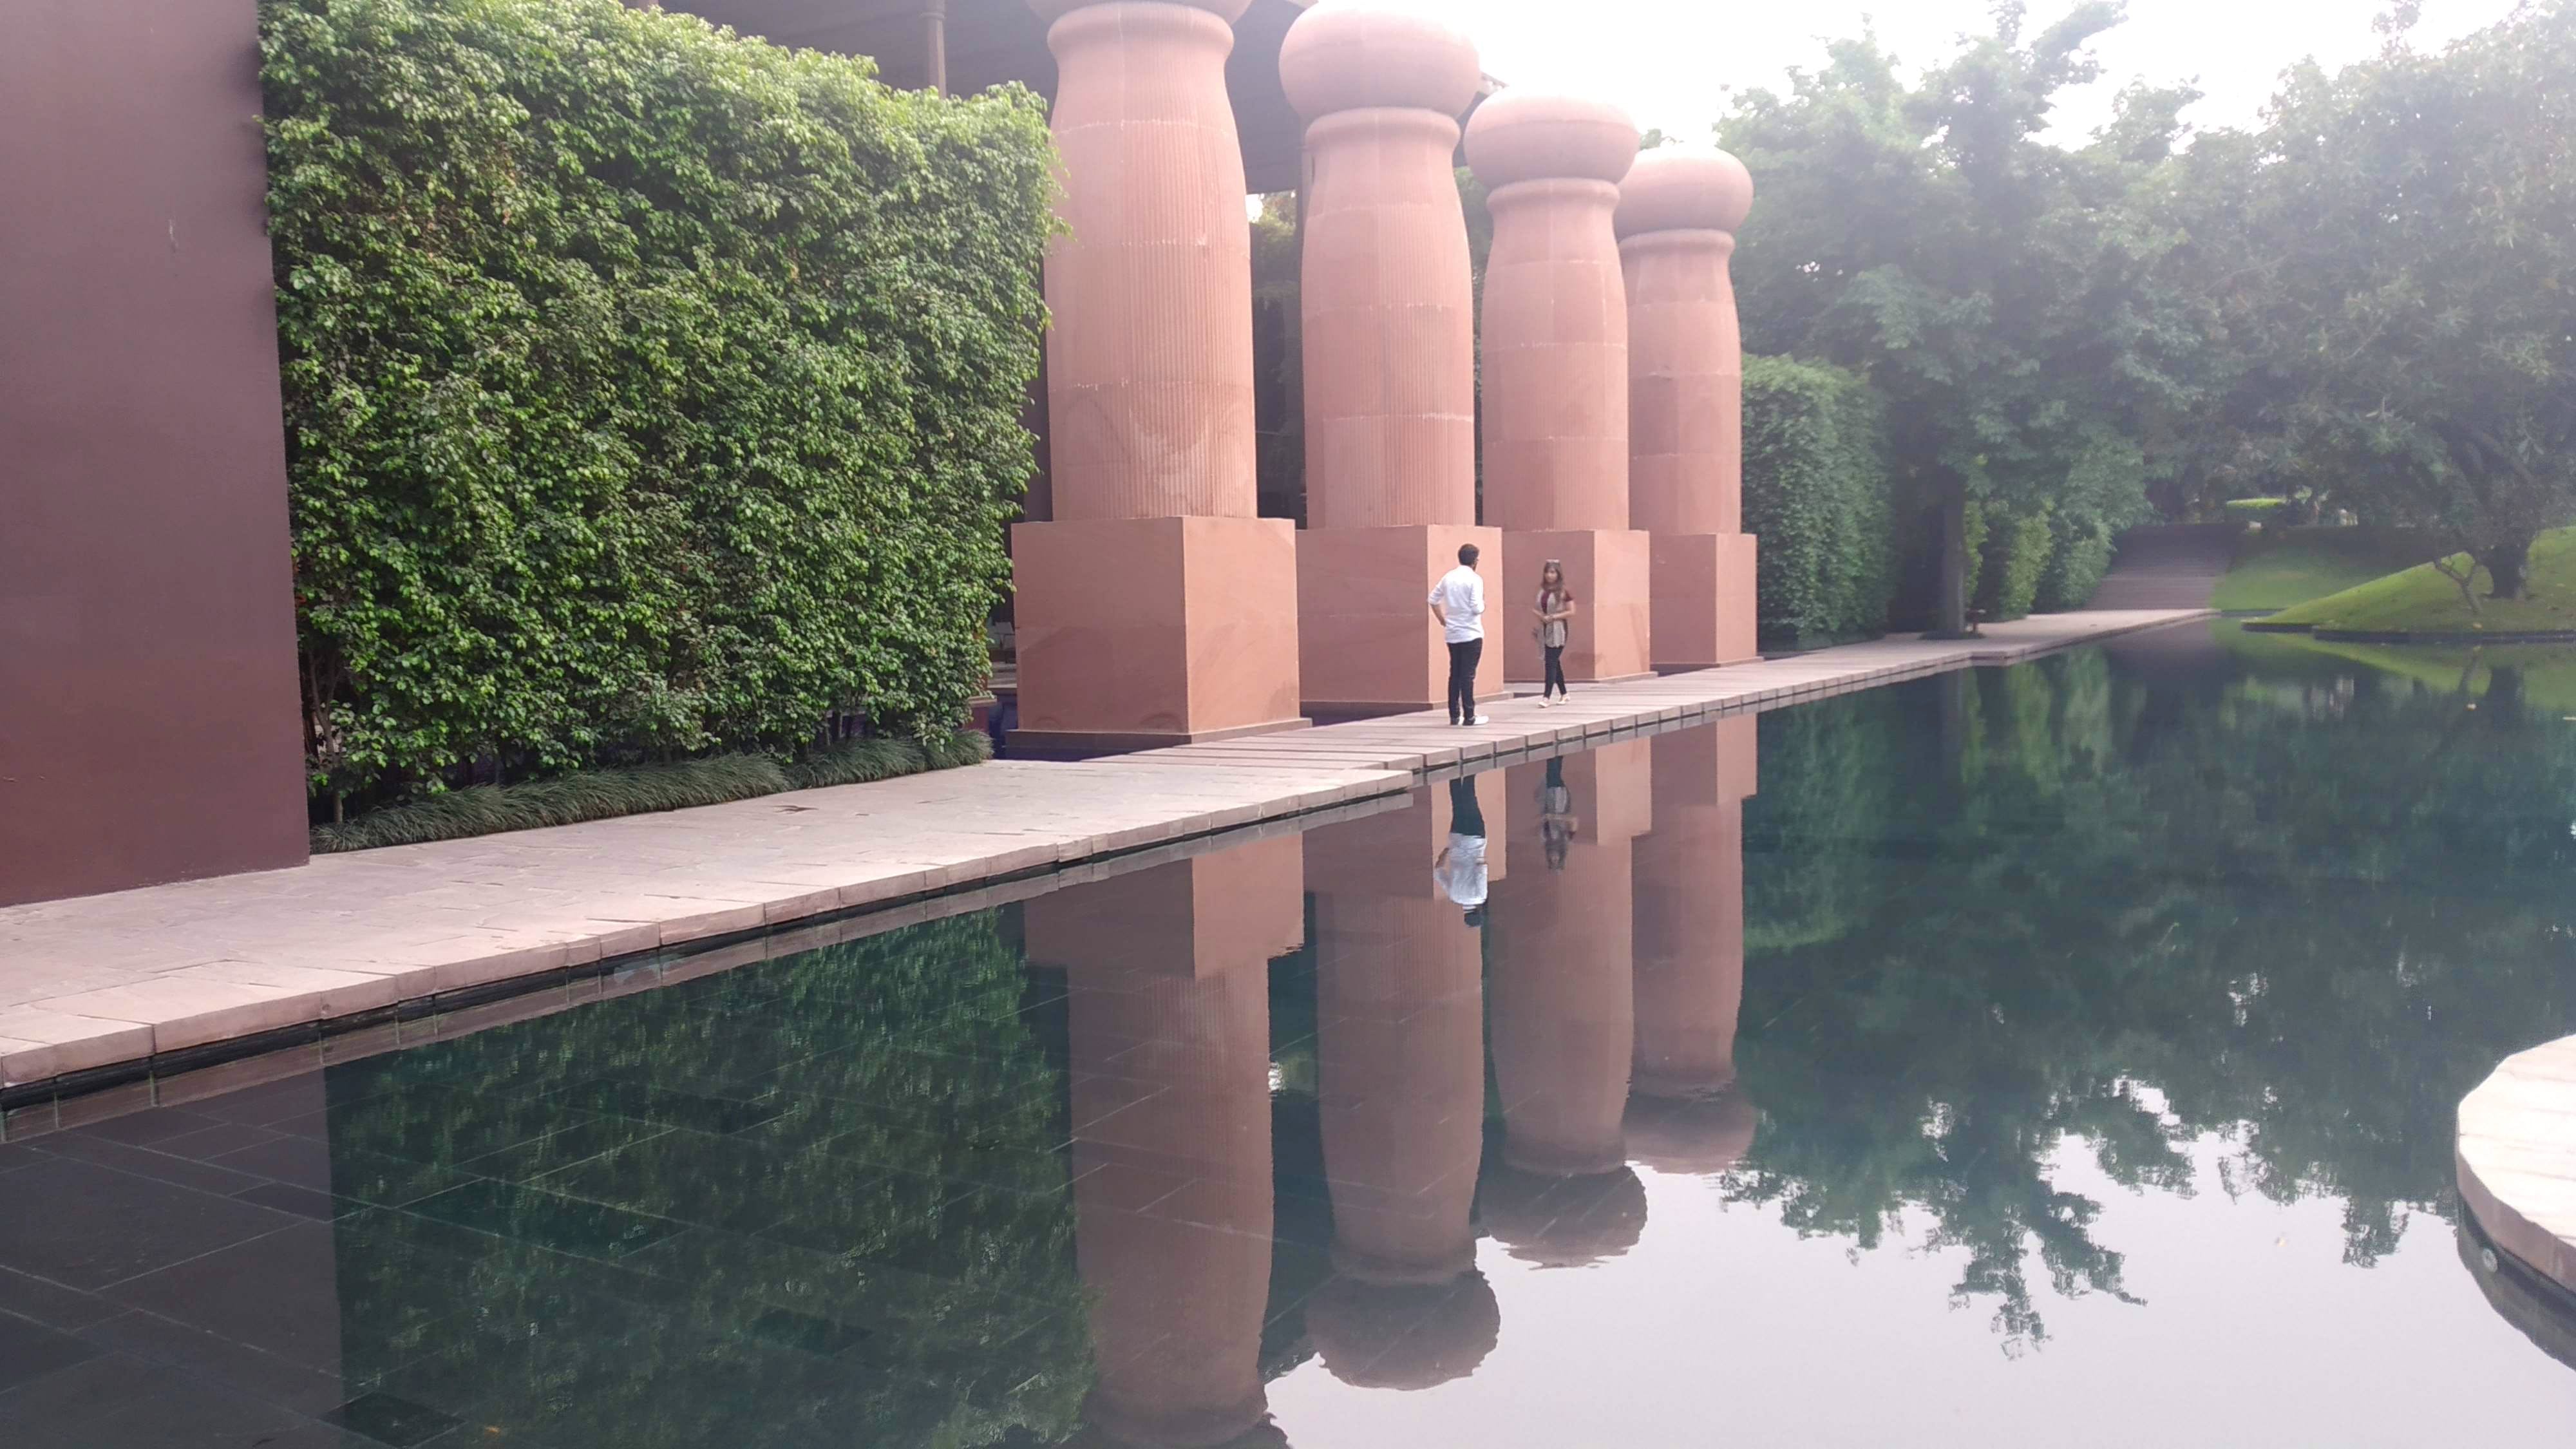 Water,Reflecting pool,Reflection,Architecture,Column